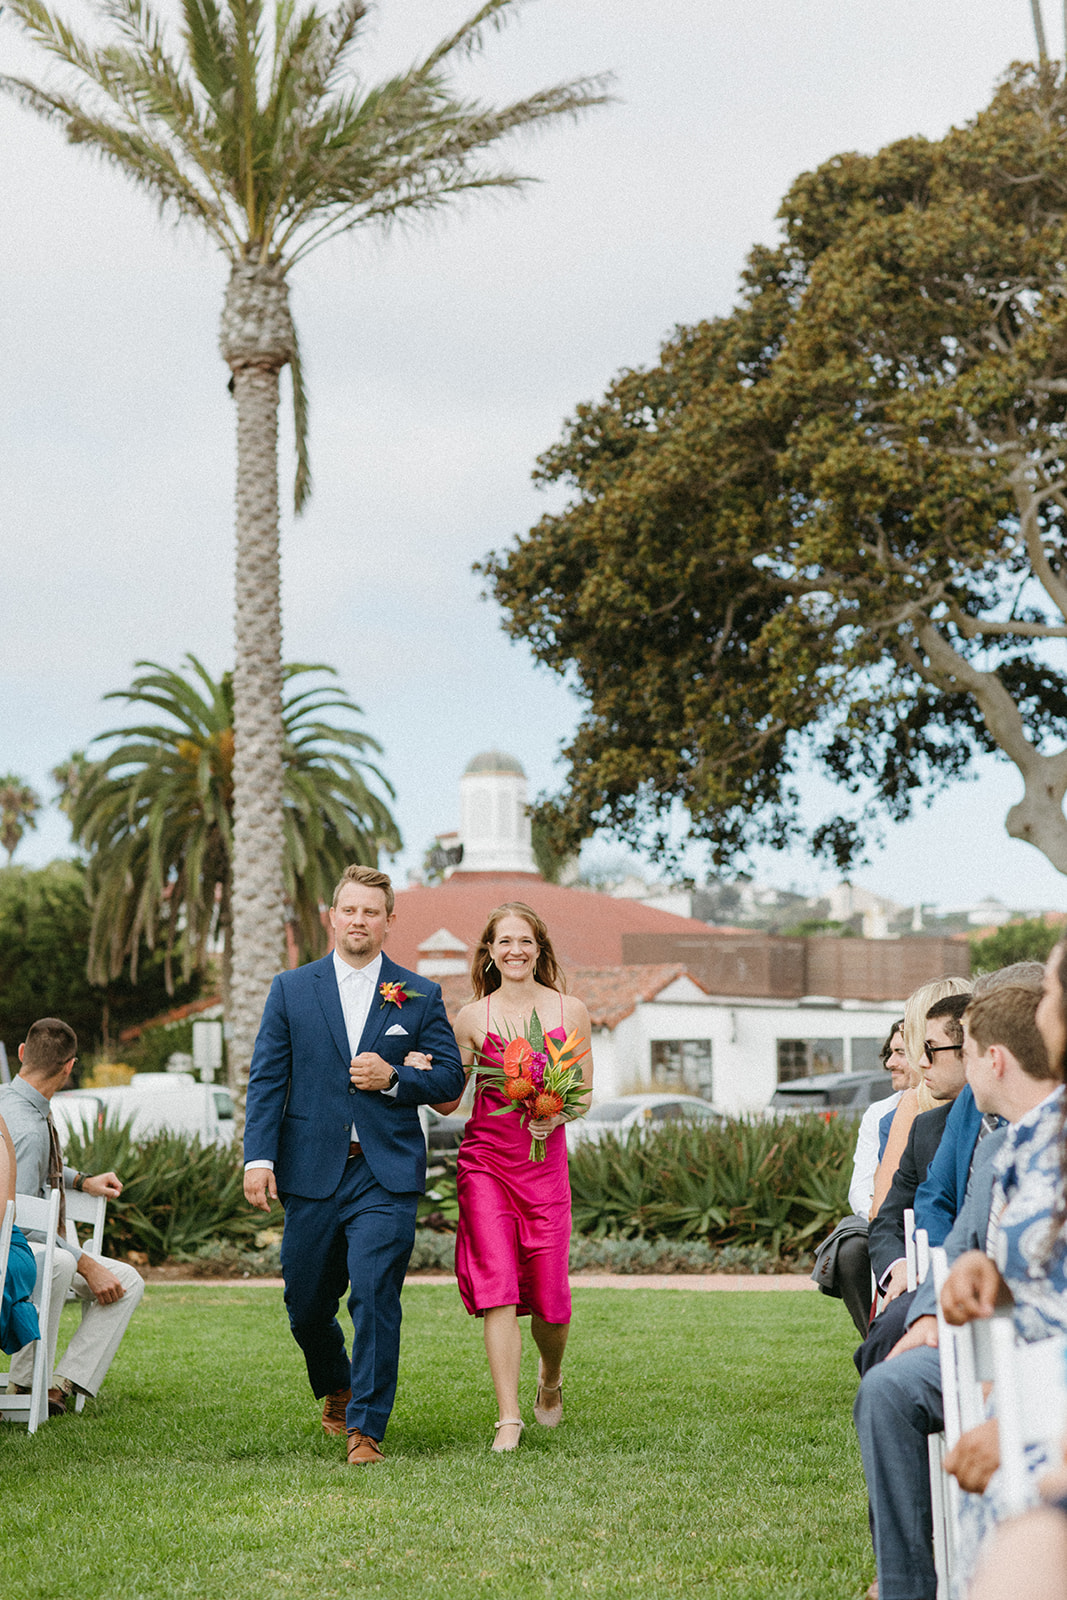 wedding party with groomsman in blue suit and bridesmaid in bright pink dress with tropical bouquet walk down aisle